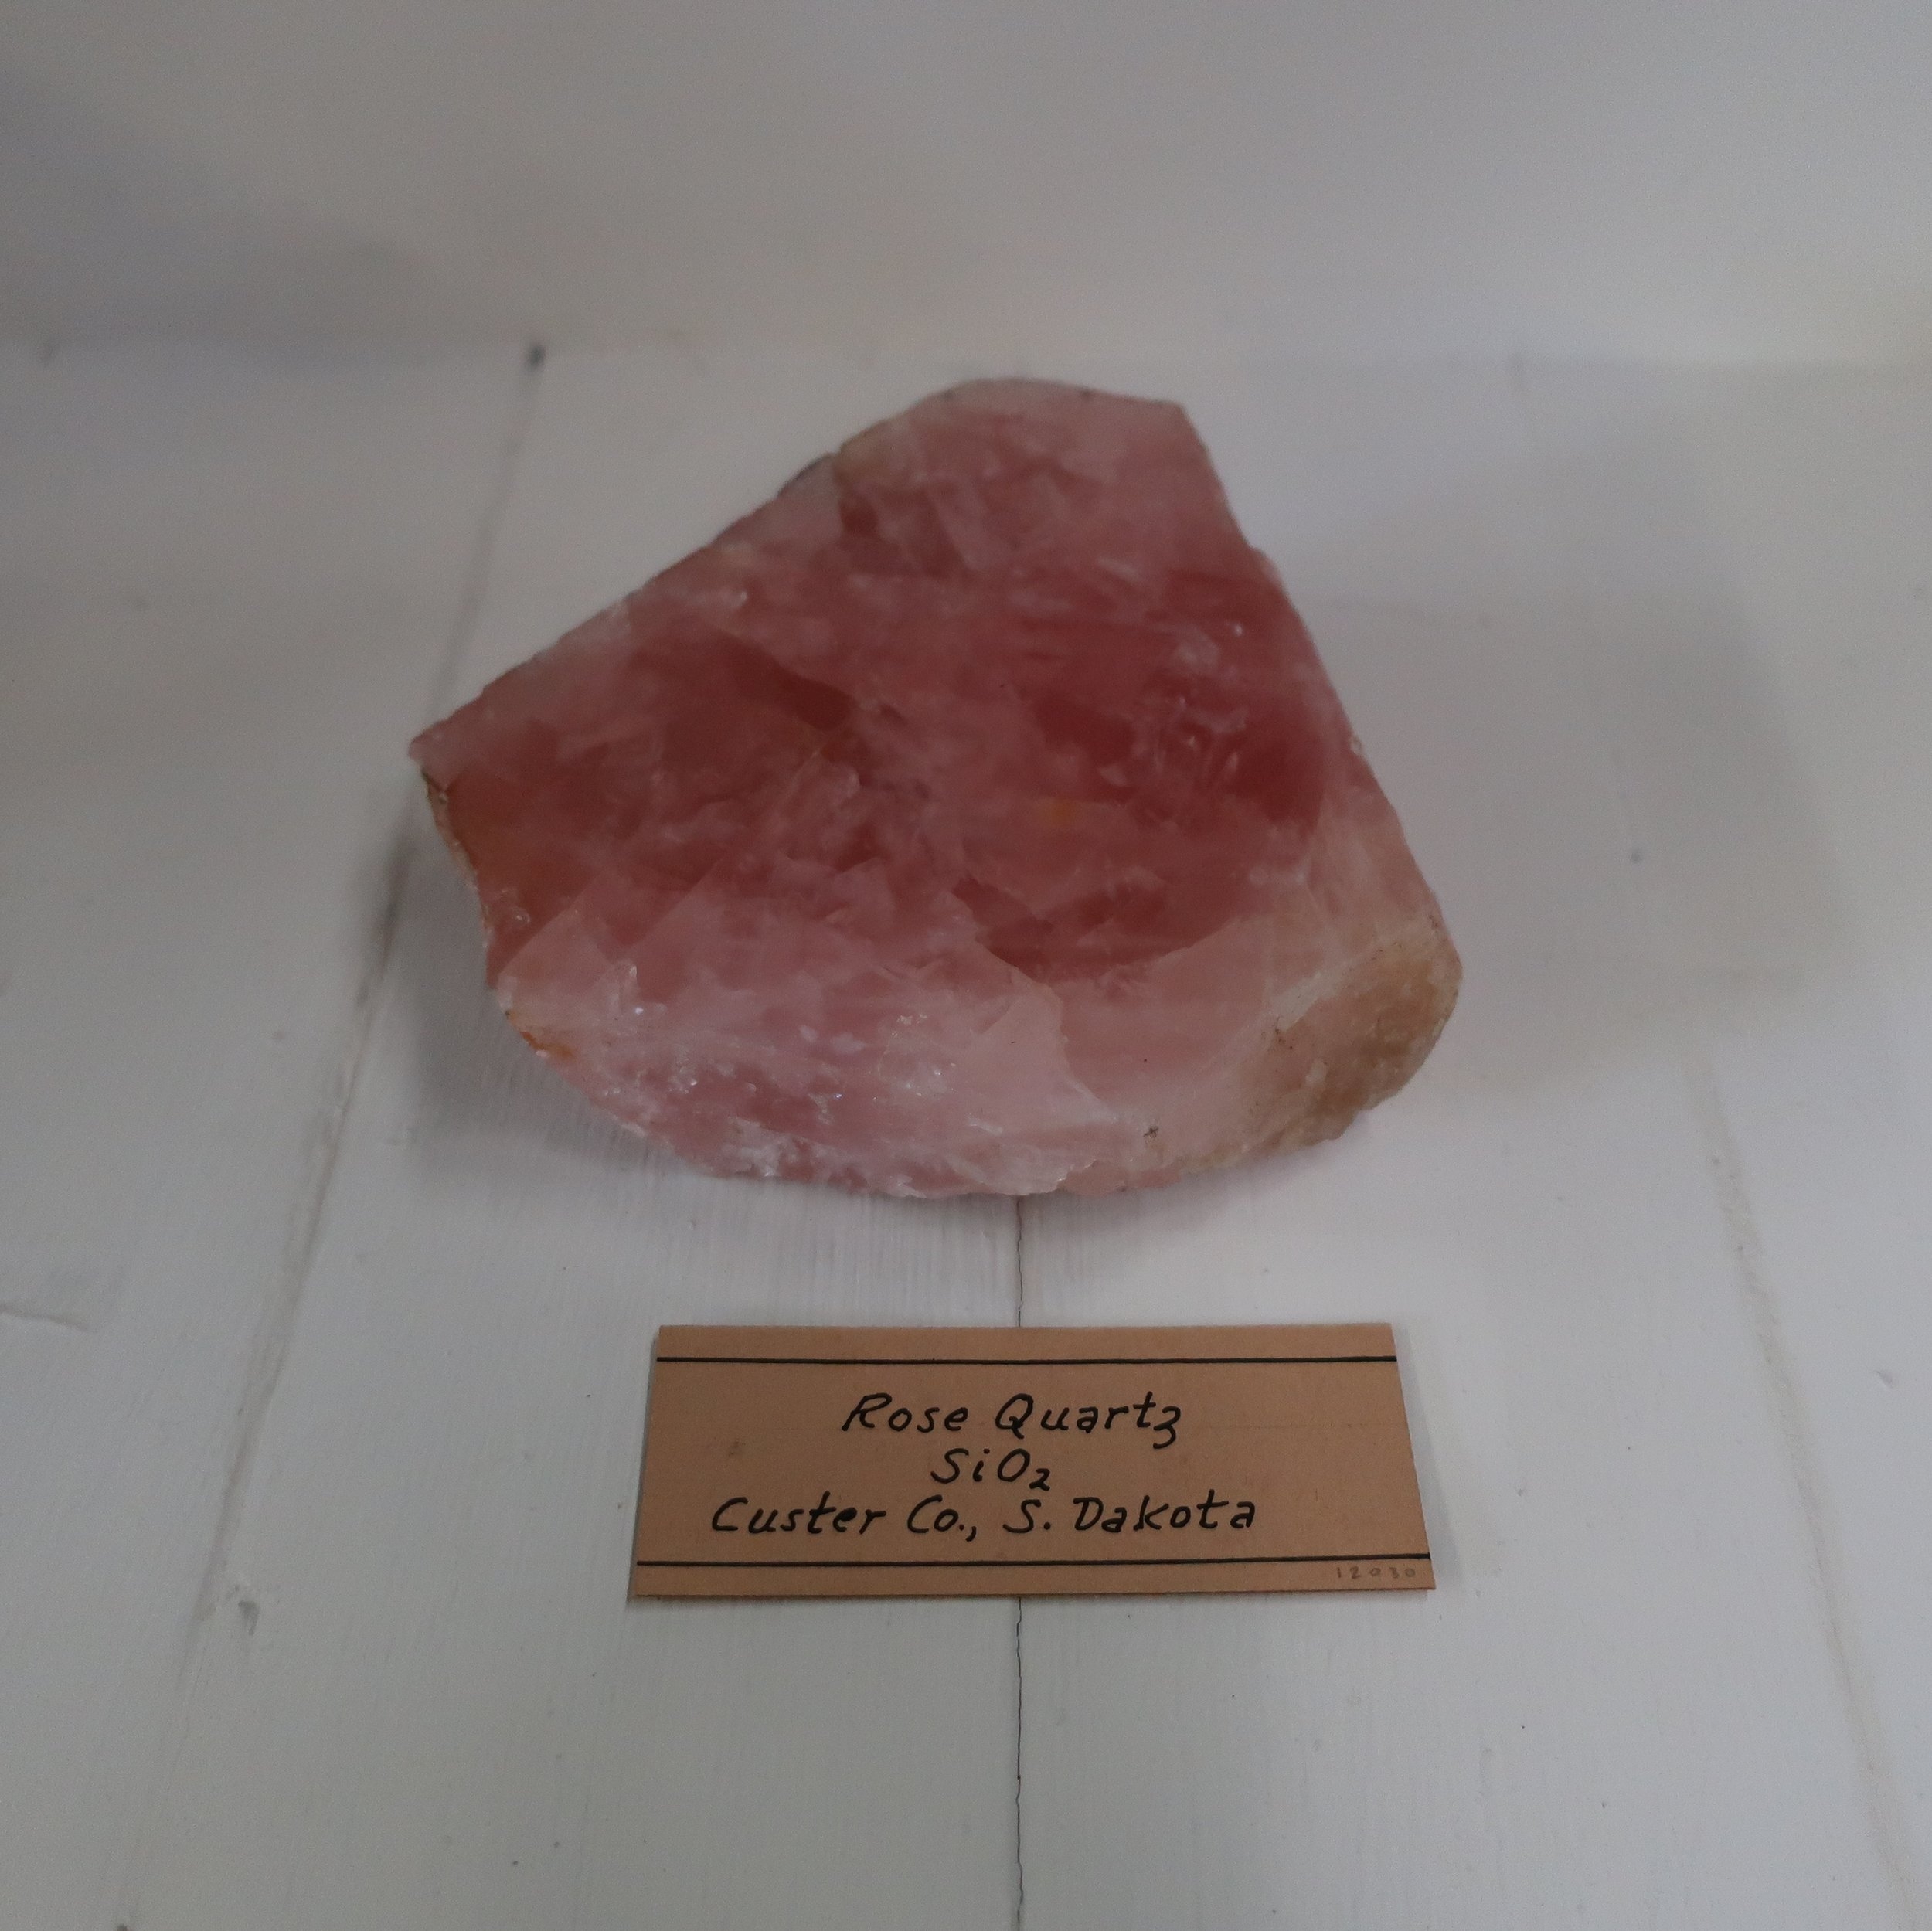   “Rose Quartz  is supposed to derive its colour from a minute admixture with manganeese, and is found in Bavaria and the United States. The best are brought from India, Siberia, Ceylon, and Persia. The finest I ever saw are from North Carolina and C